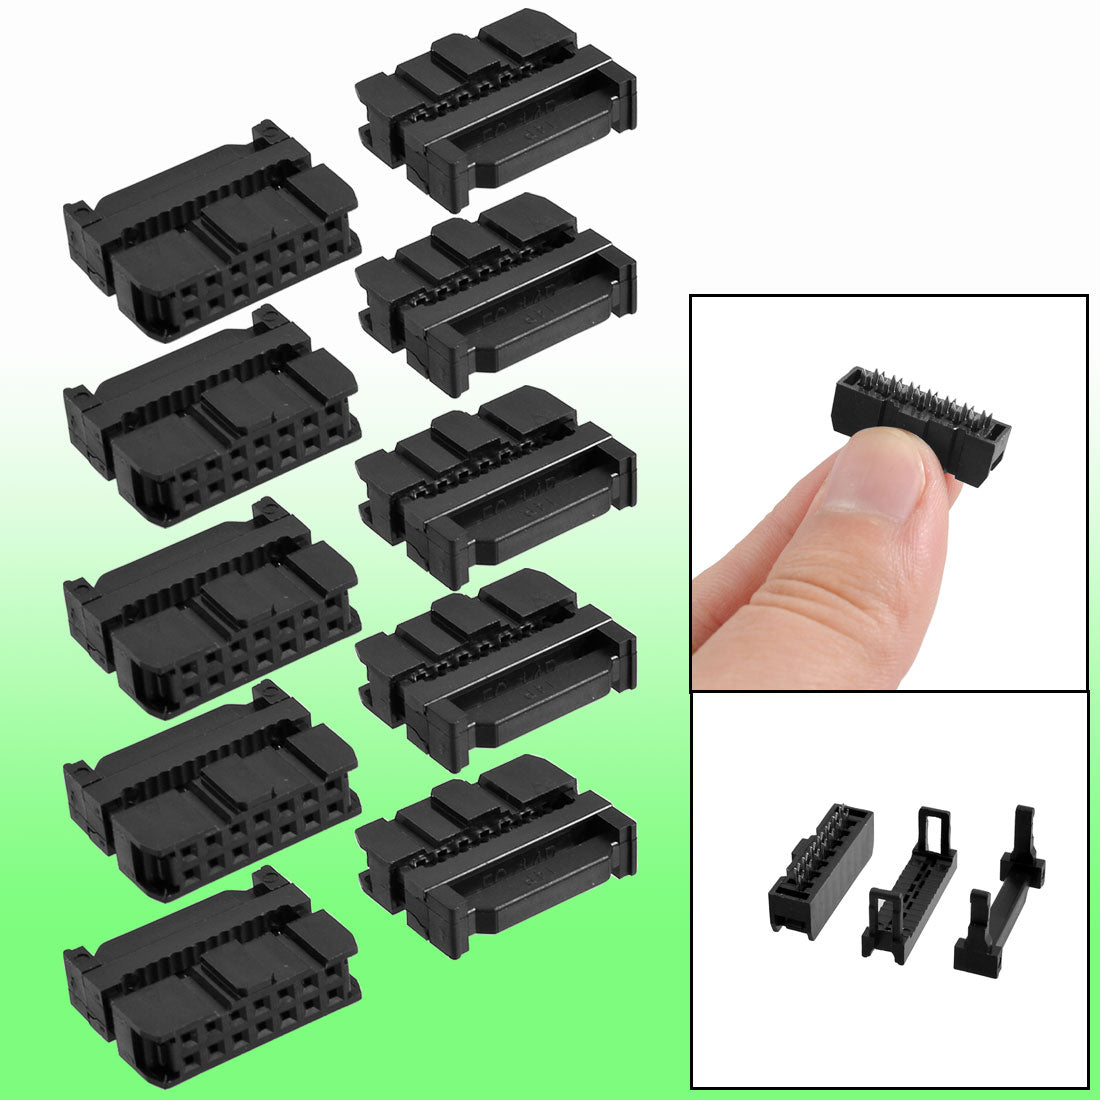 uxcell Uxcell 10 x 14 Position Female IDC Connector Flat Ribbon Cable Connectors Black 2.54mm